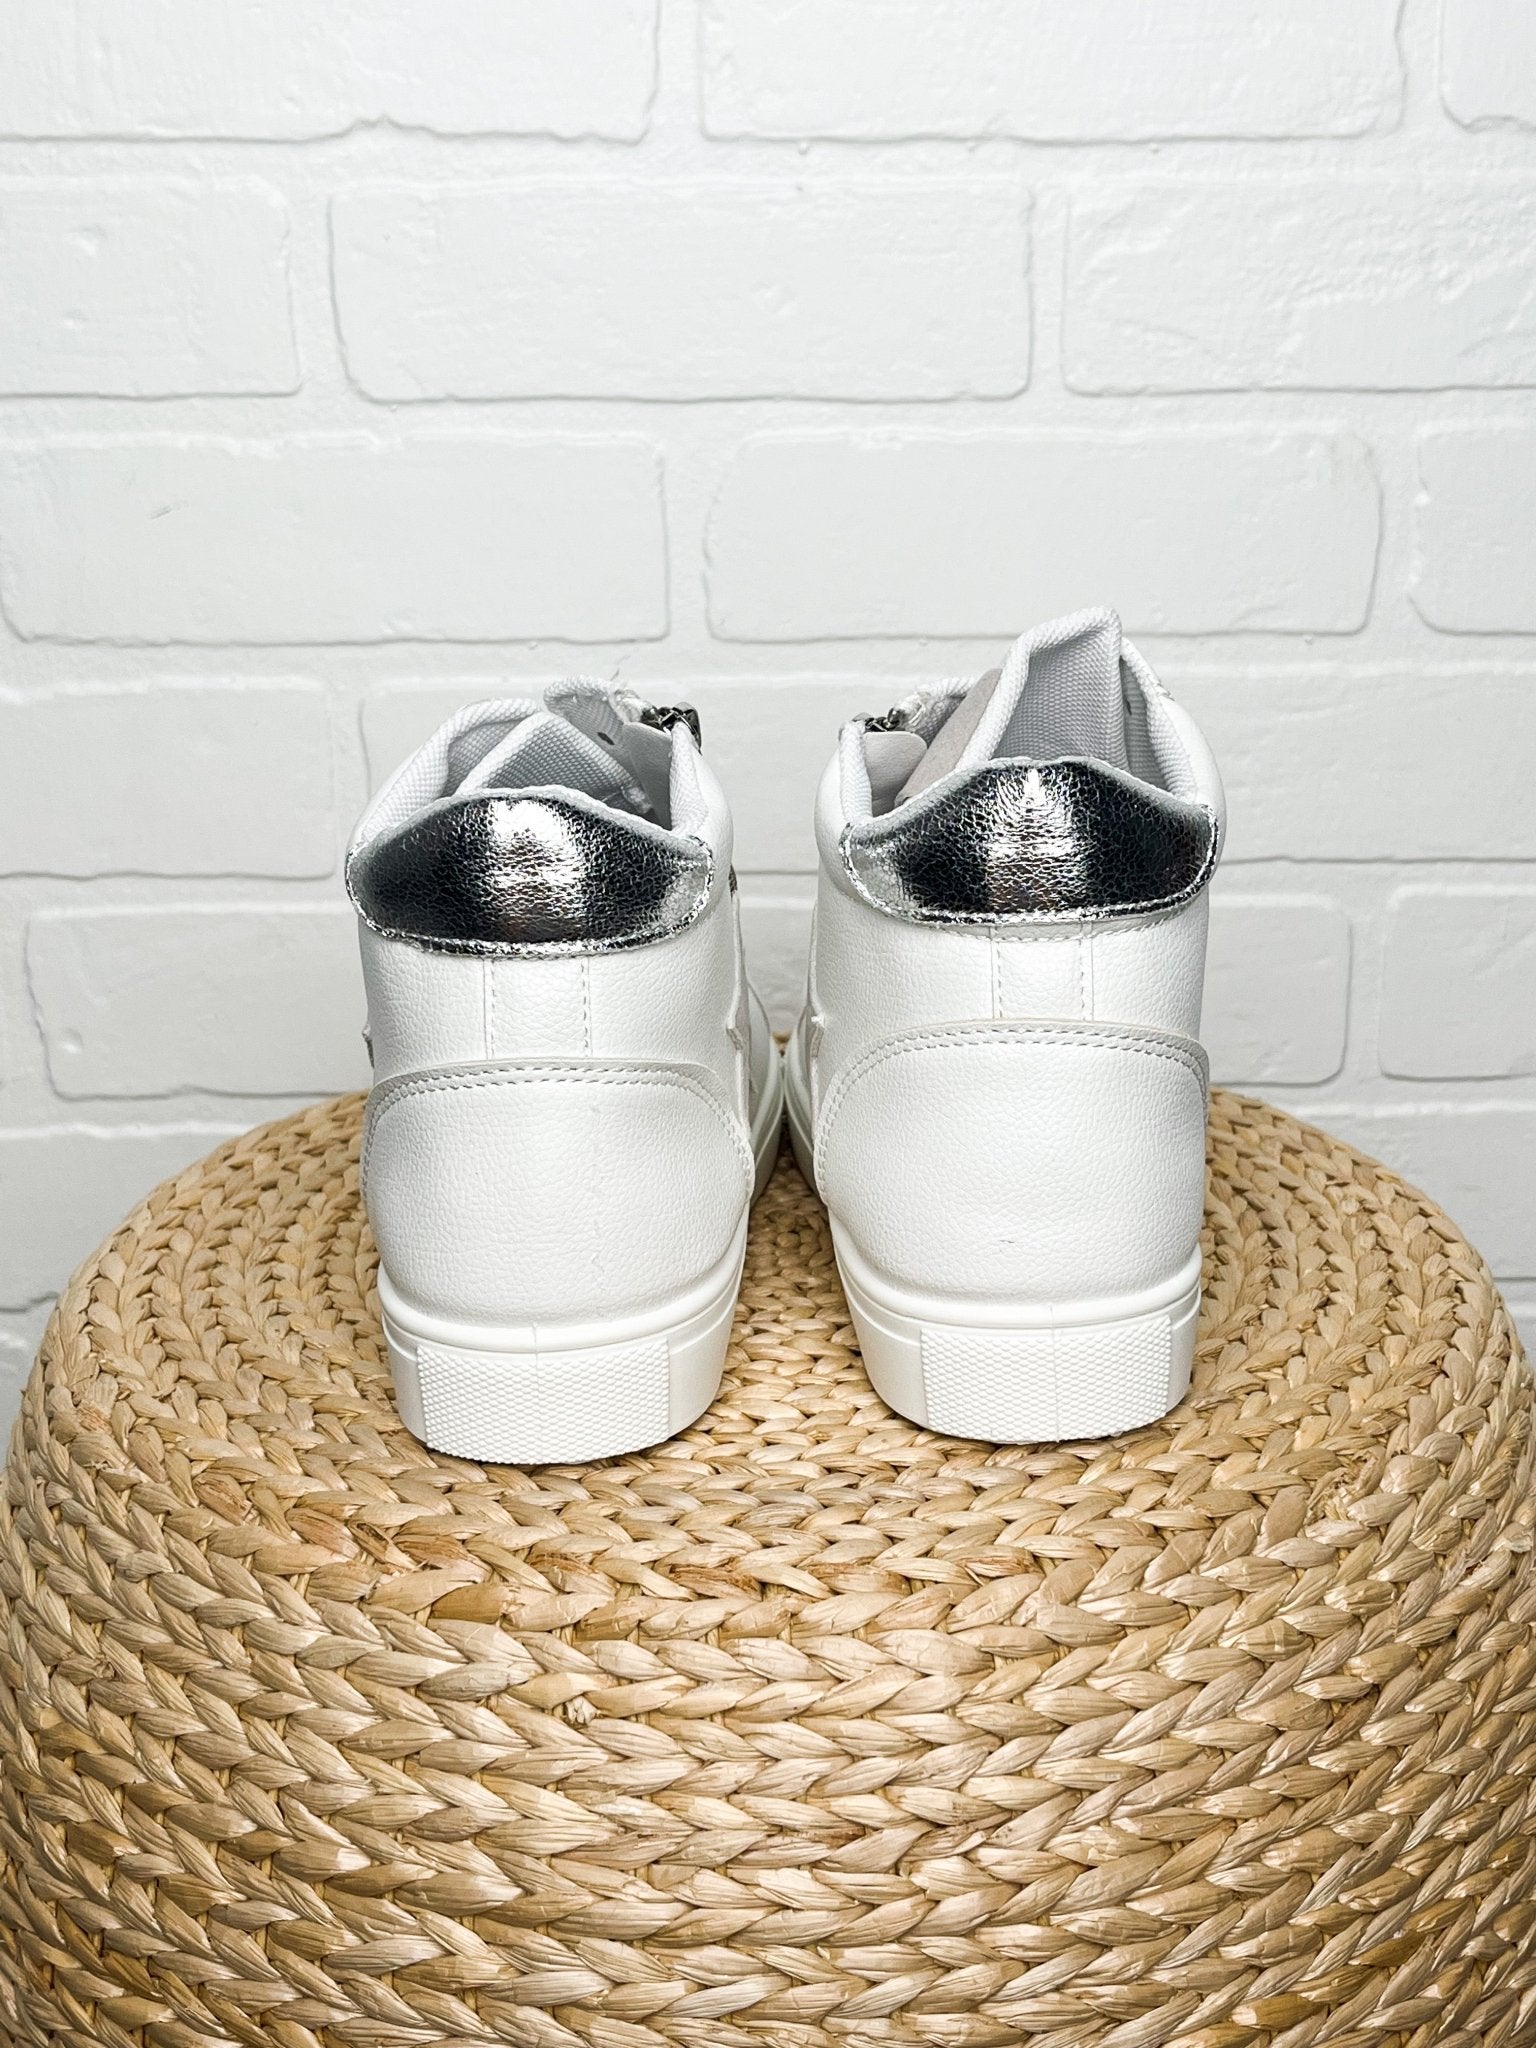 Fast star zip sneakers white Stylish Shoes - Womens Fashion Shoes at Lush Fashion Lounge Boutique in Oklahoma City